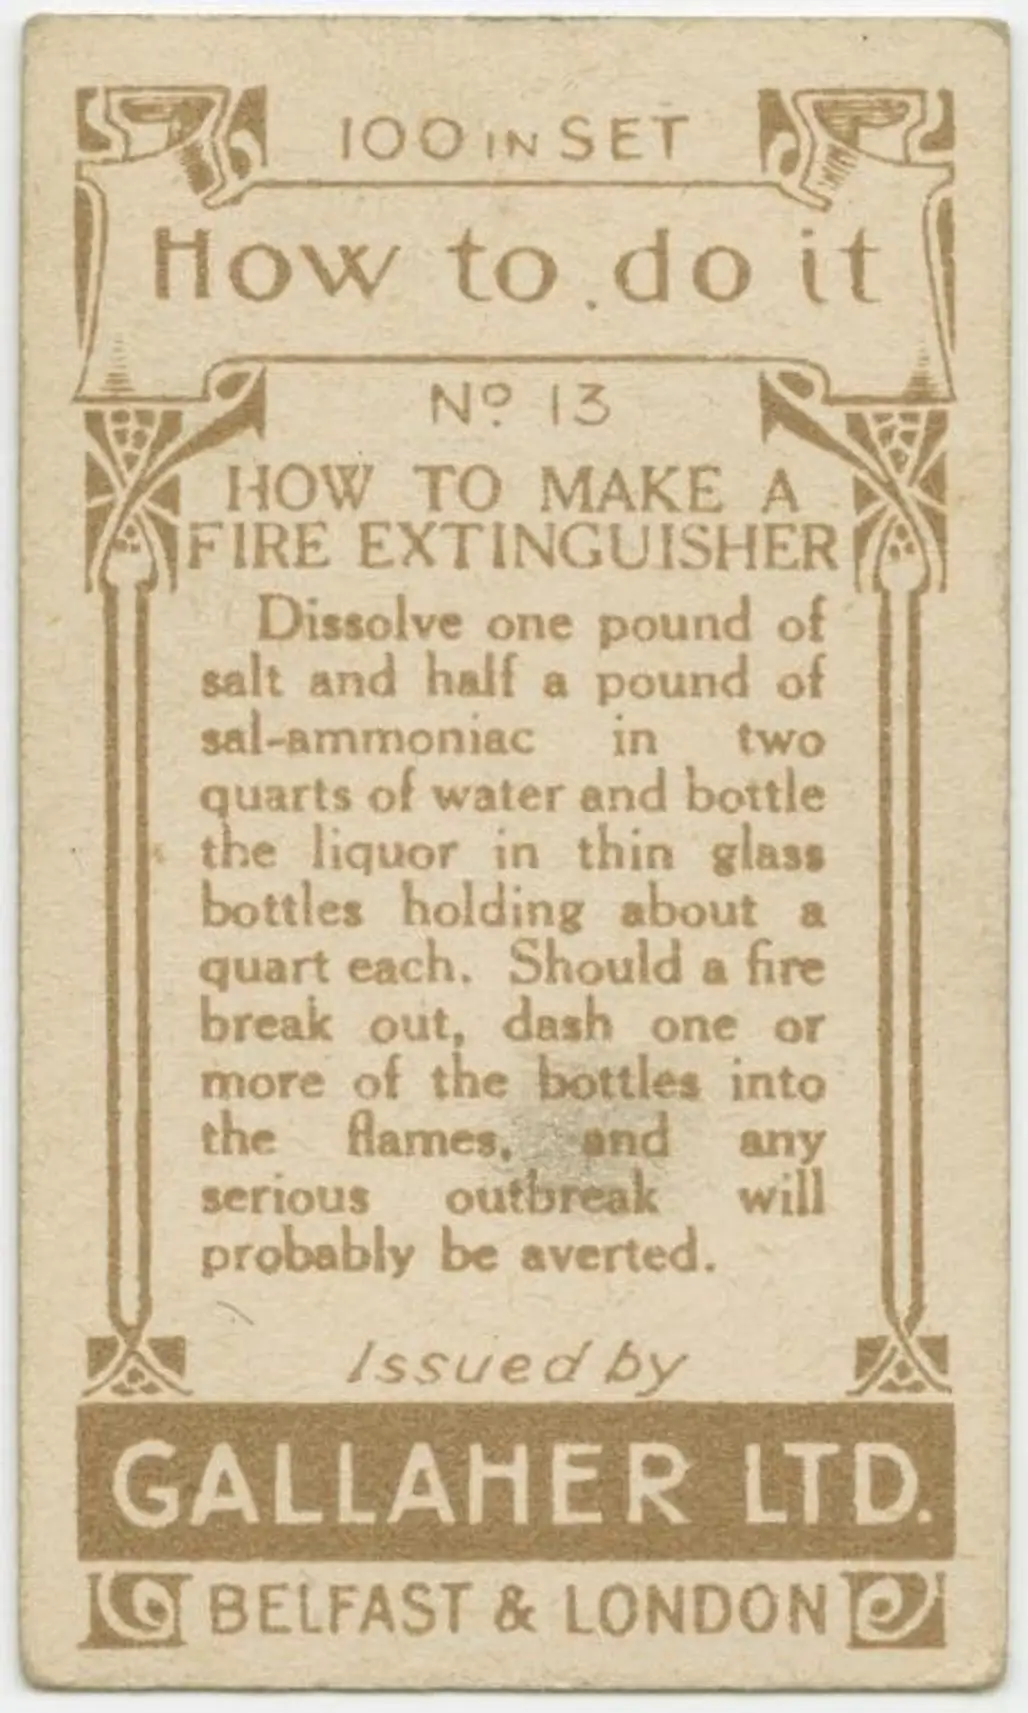 Shouldn't Everybody Need to Know How to Make a DIY Fire Extinguisher?